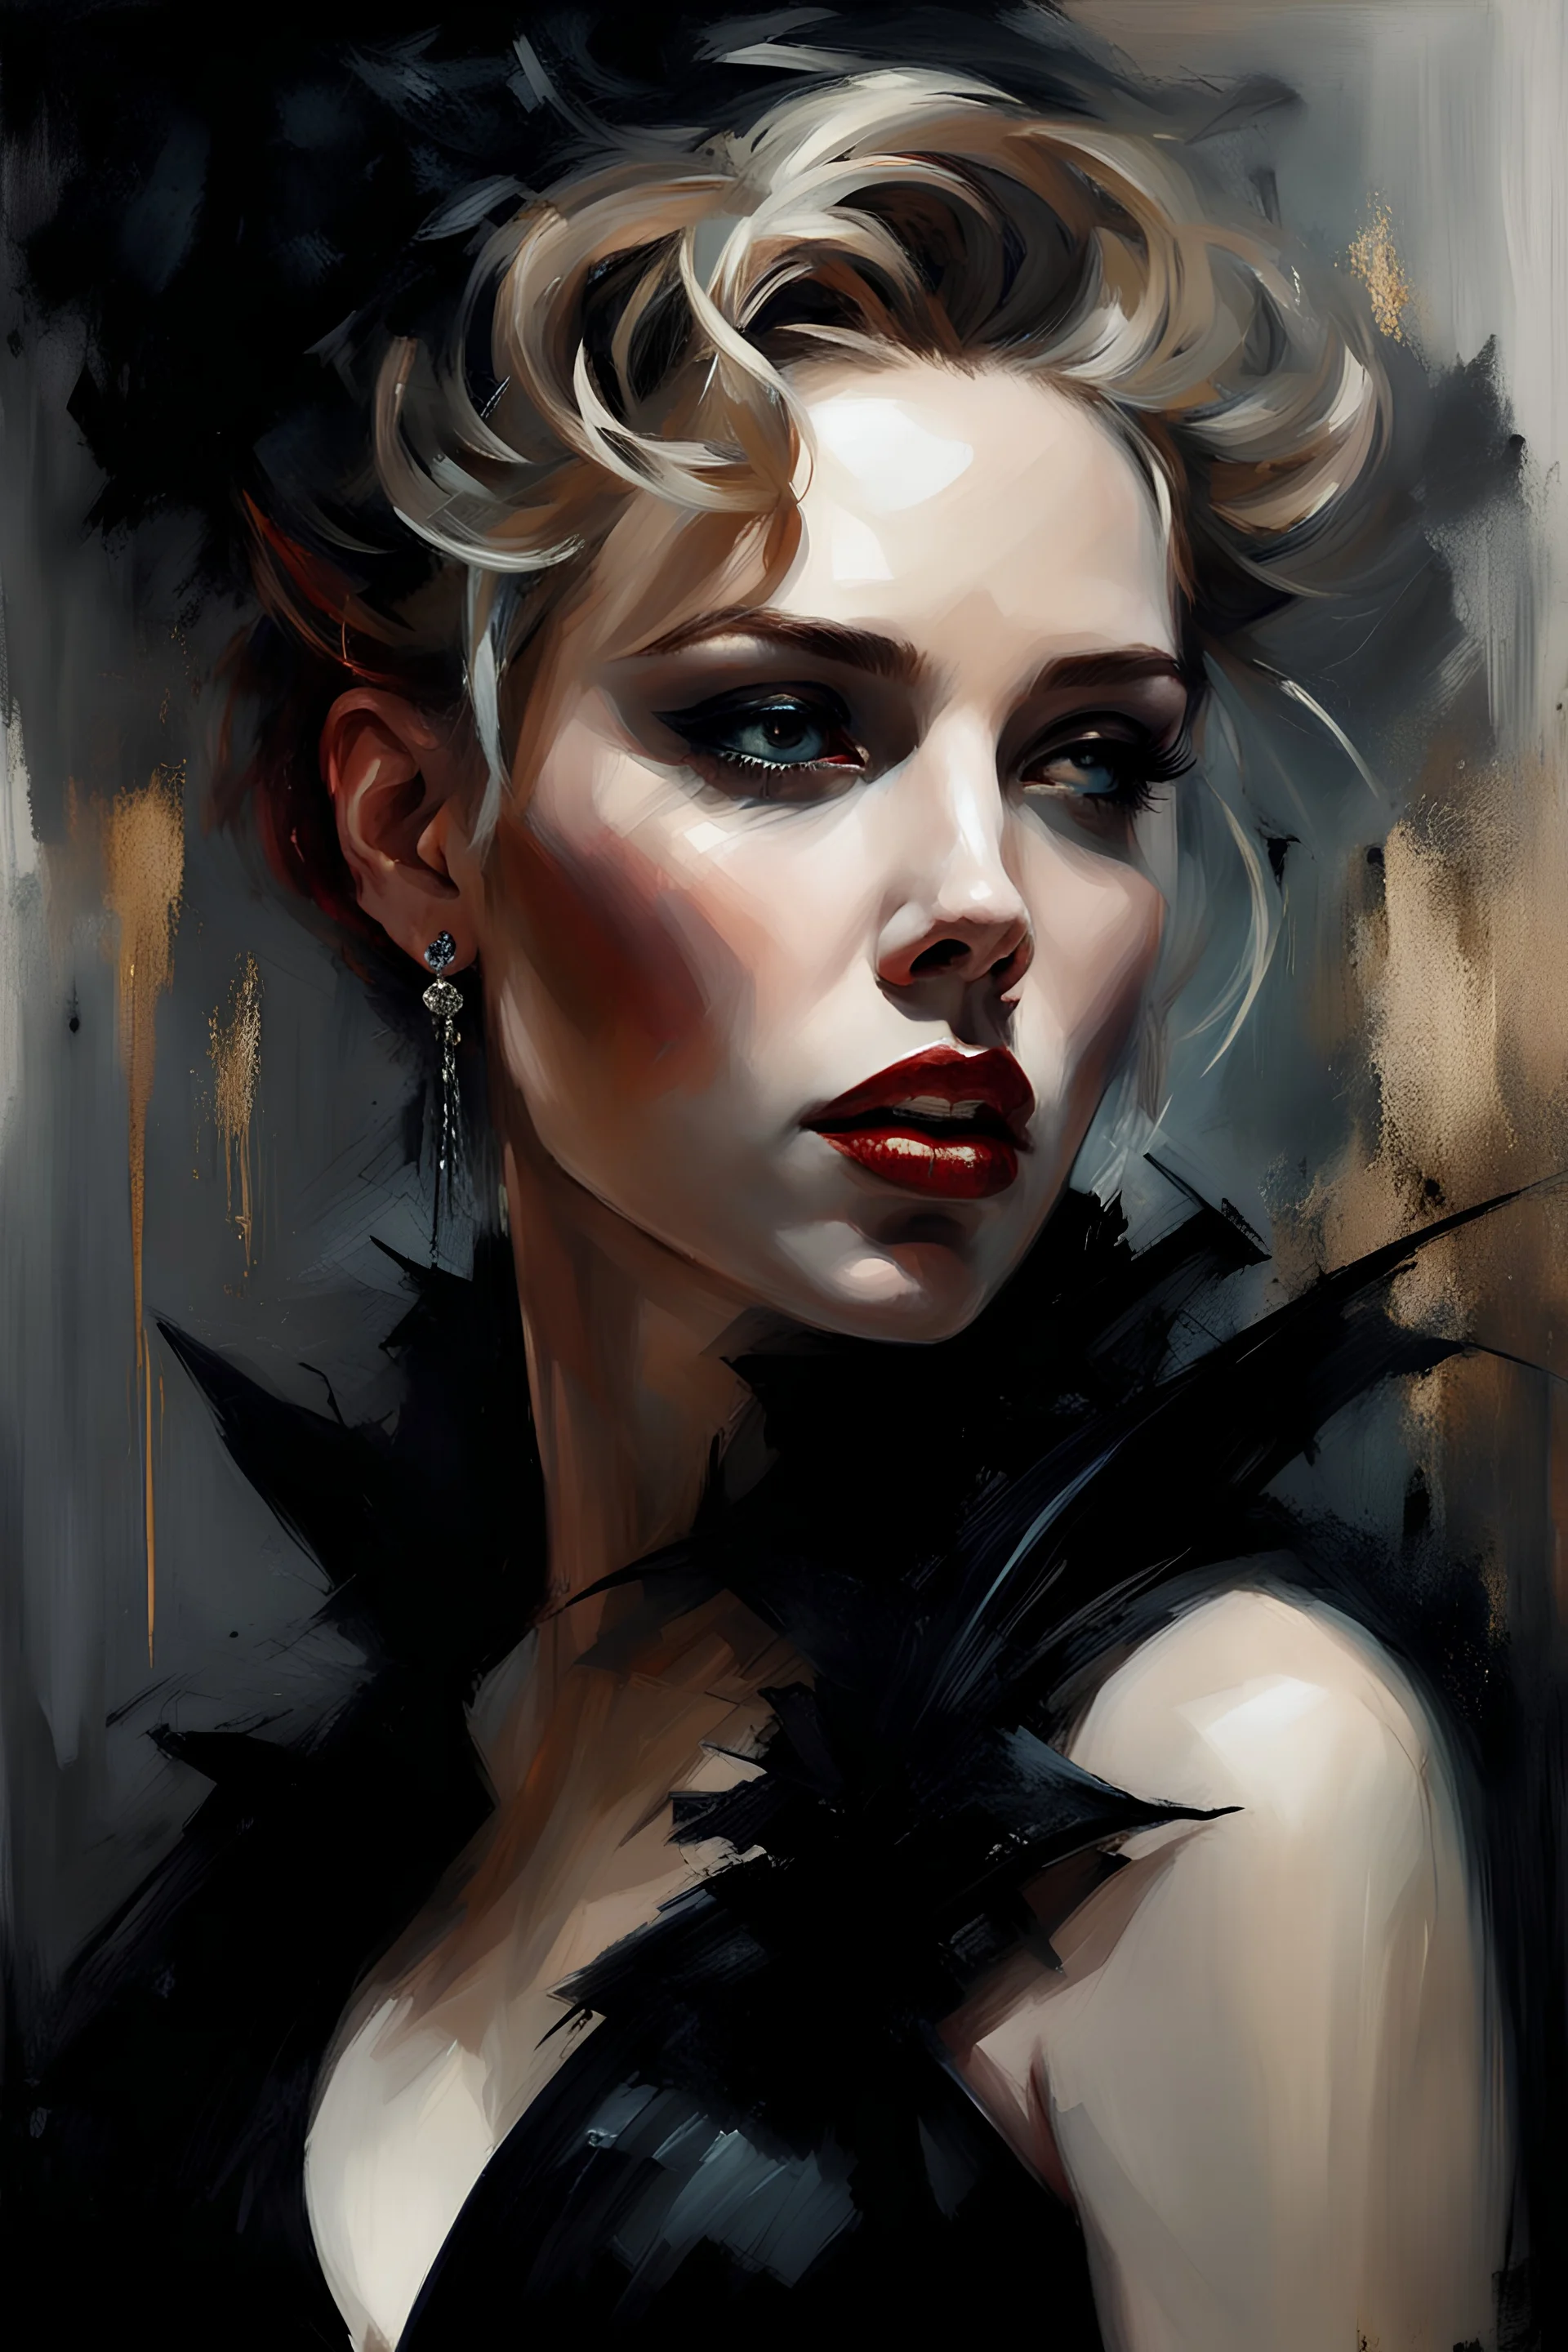 {{Scarlett Johansson}} as a goth queen vampire :: by Gil Elvgren and Alex Ross and Carne Griffithsrolling dice :: dark mysterious esoteric atmosphere :: digital matt painting with rough paint strokes by Jeremy Mann + Carne Griffiths + Leonid Afremov, black canvas